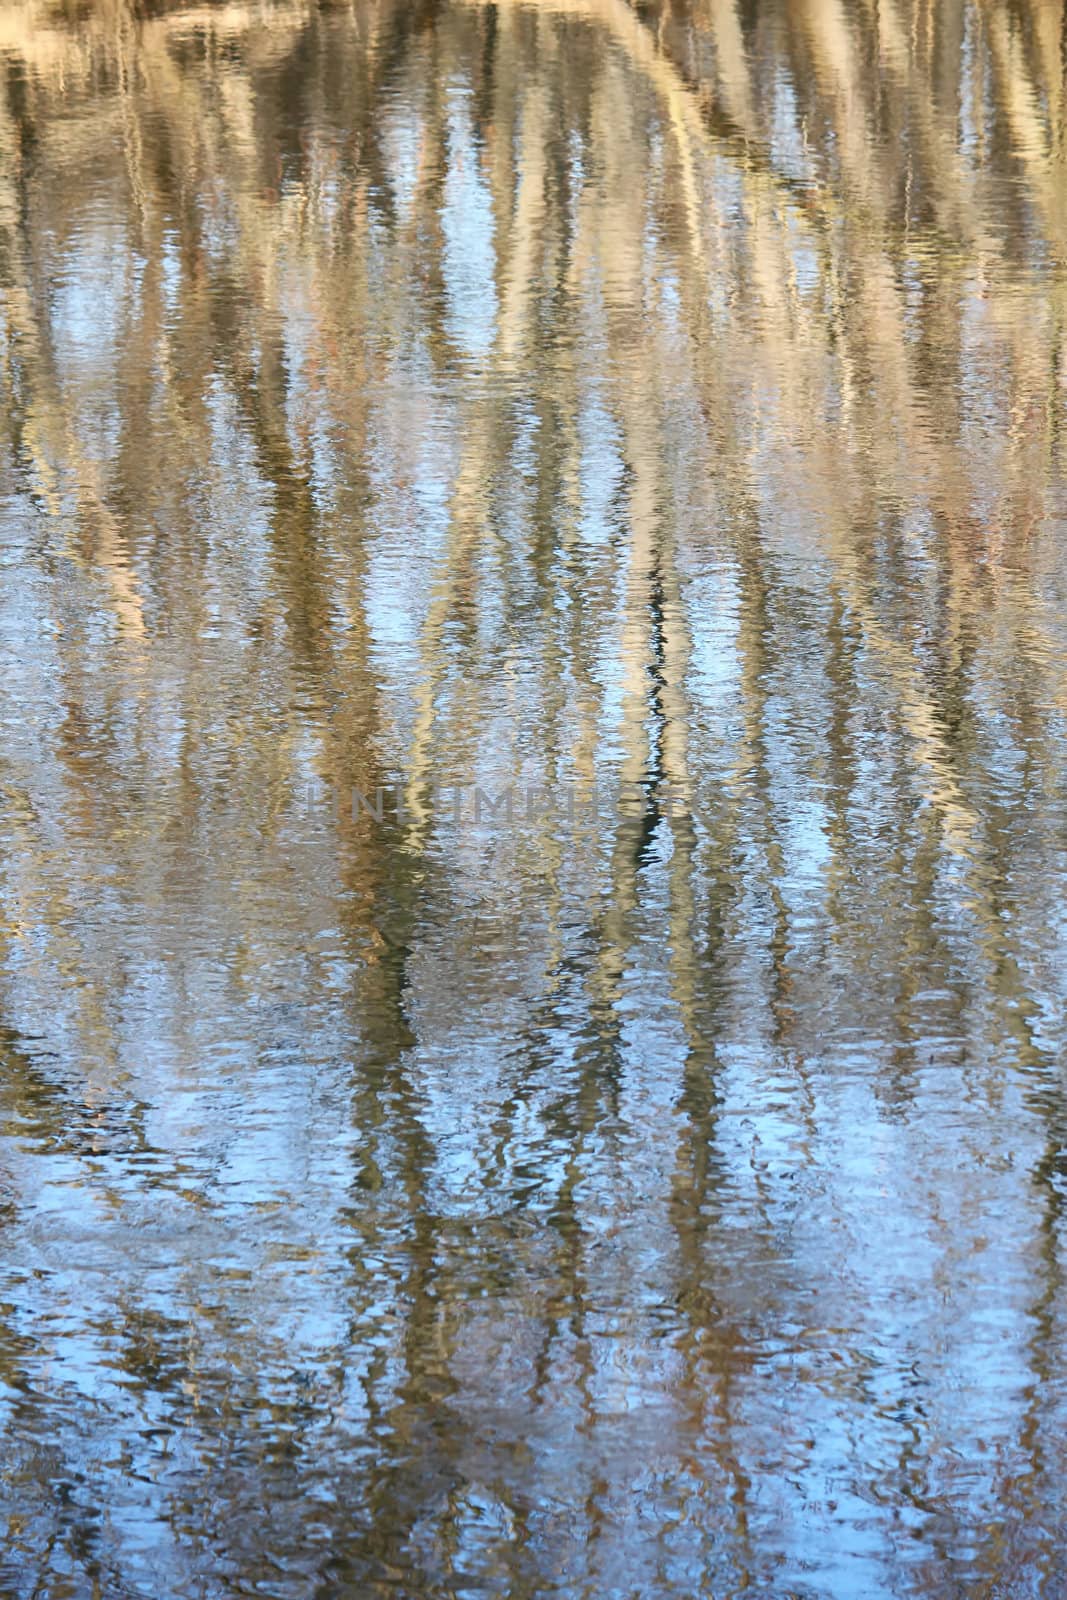 Trees reflect off the surface of the Kishwaukee River in northern Illinois.